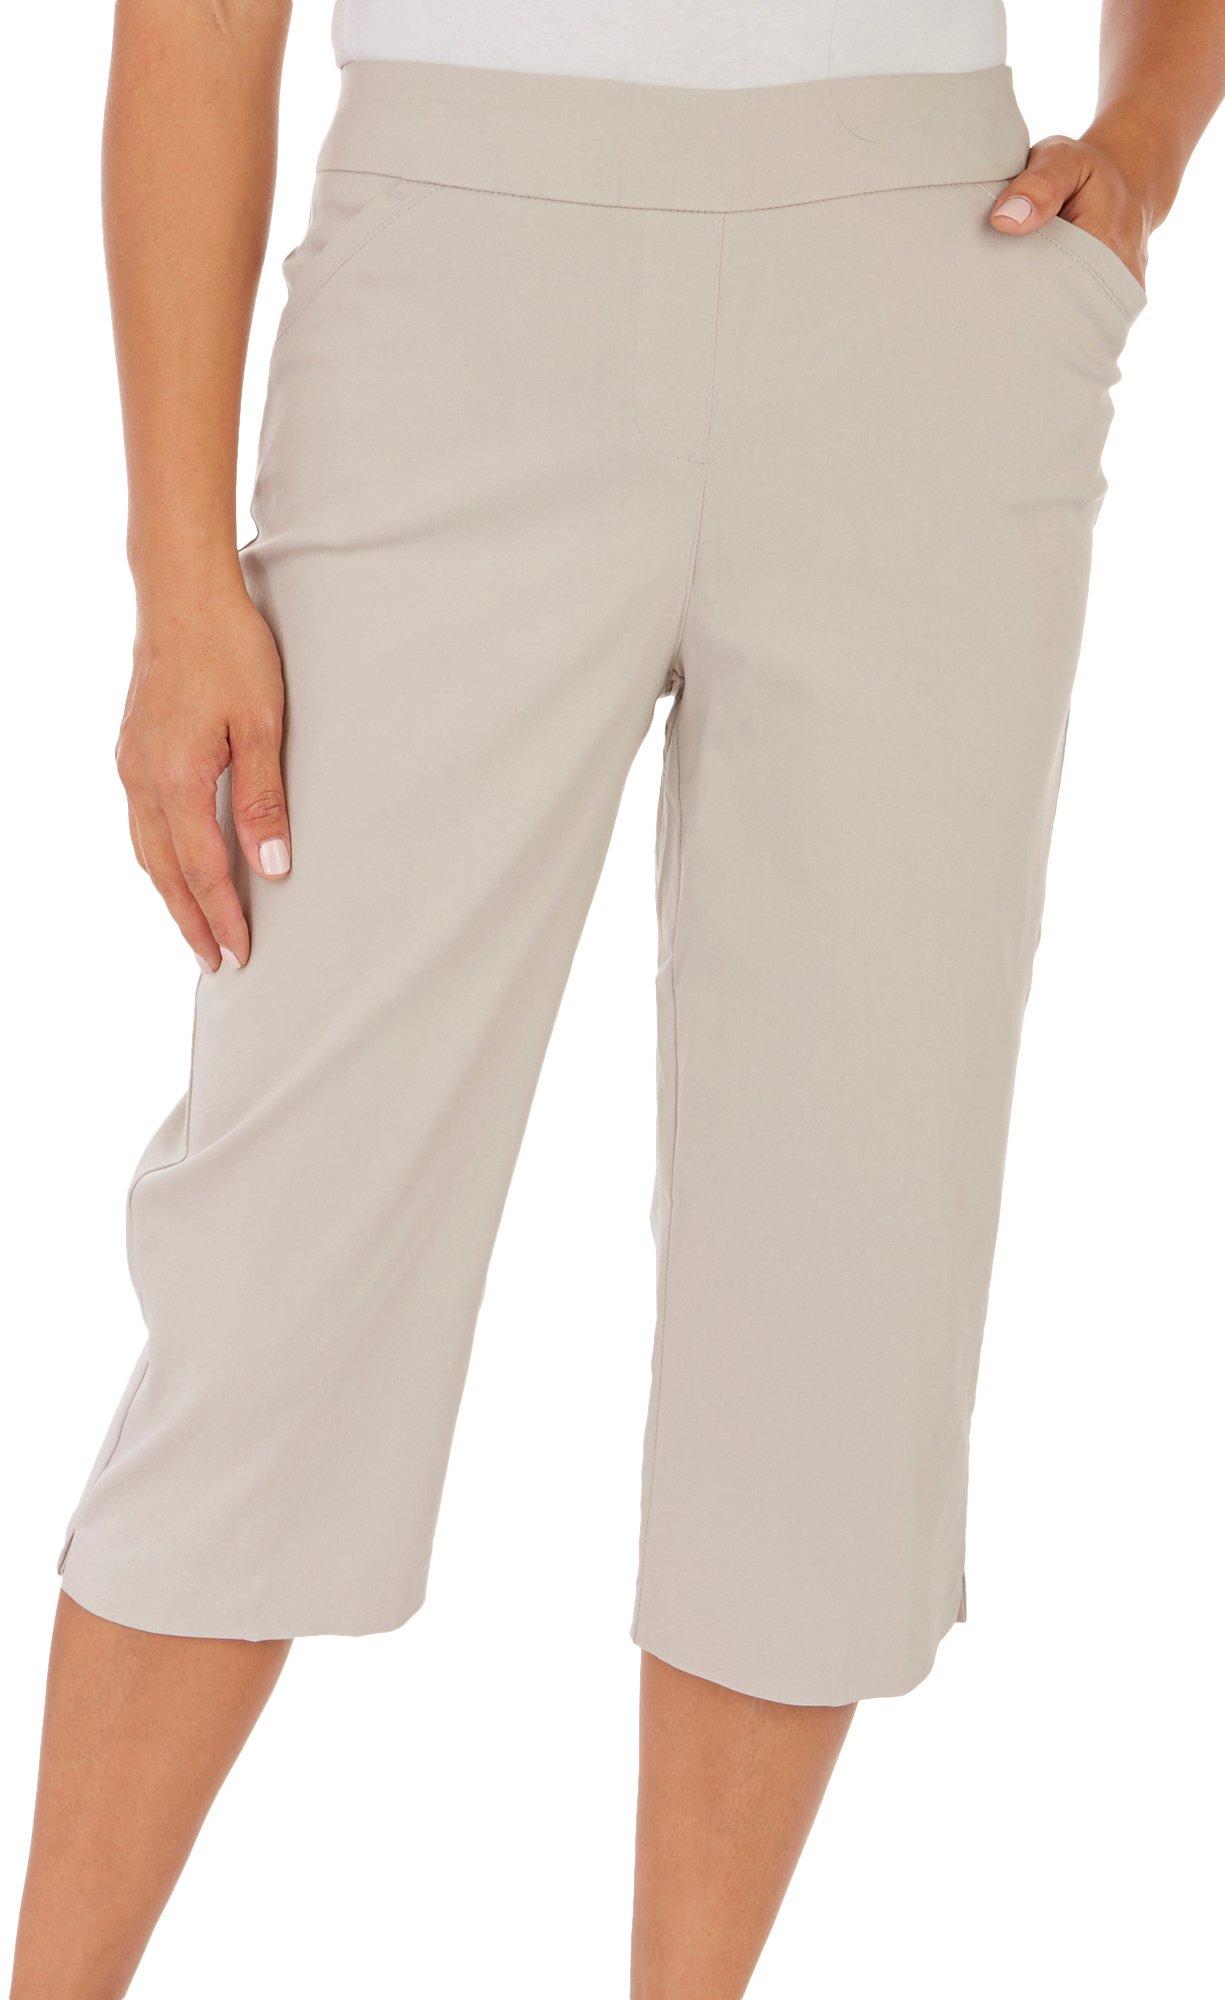 Talbots T by Womens Athletic Capri Pants Size XLP Petite Pull On 21 Inseam  - $25 - From Michelle